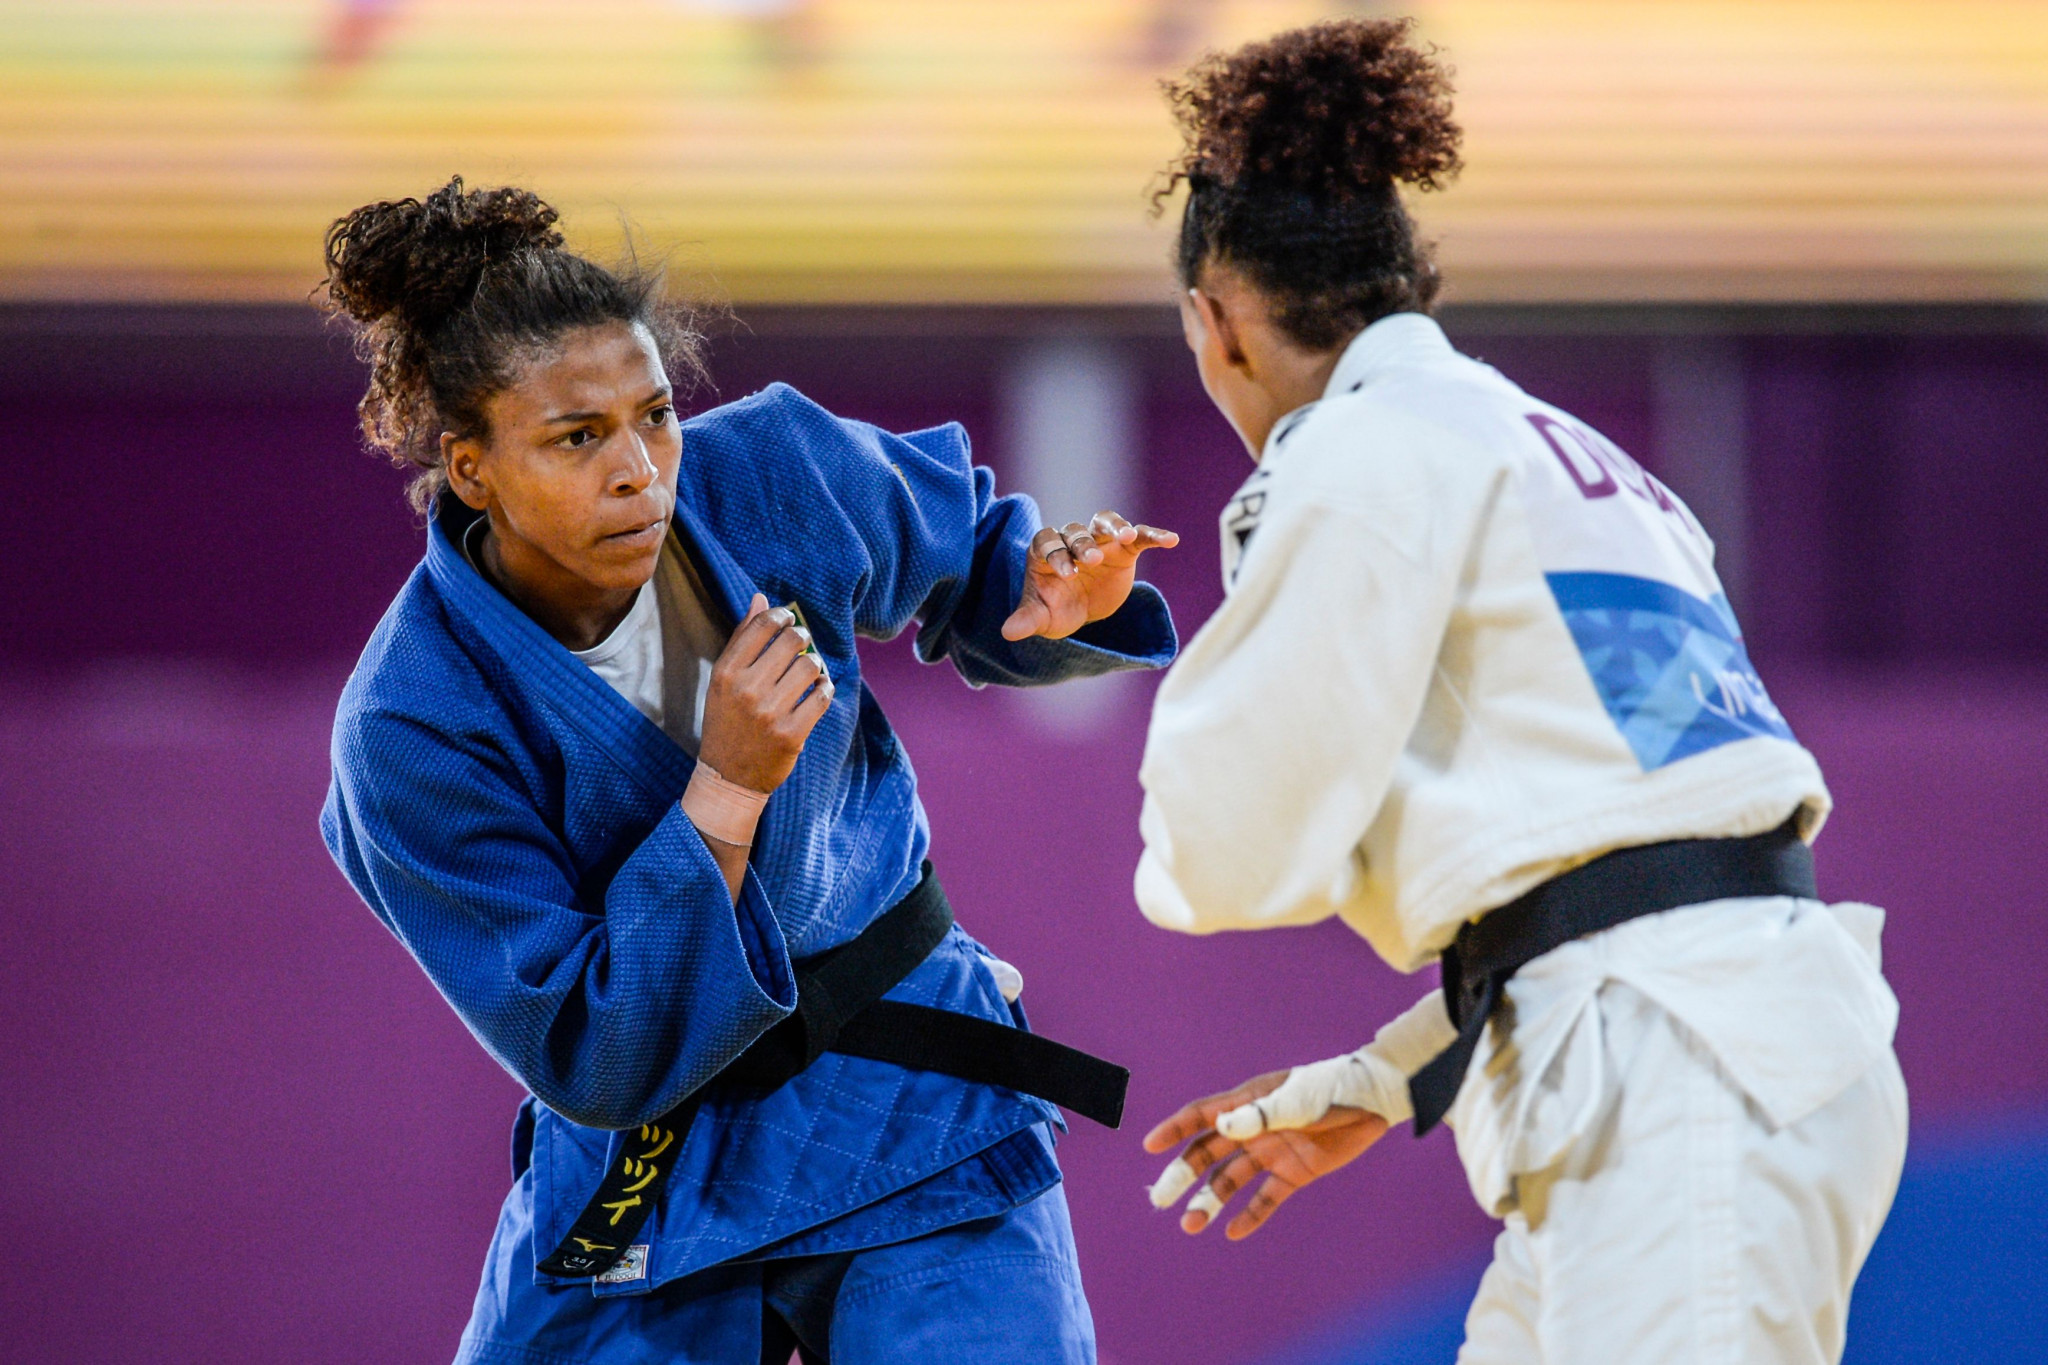 Silva "always has Tokyo 2020 in mind" as she prepares for IJF World Championships